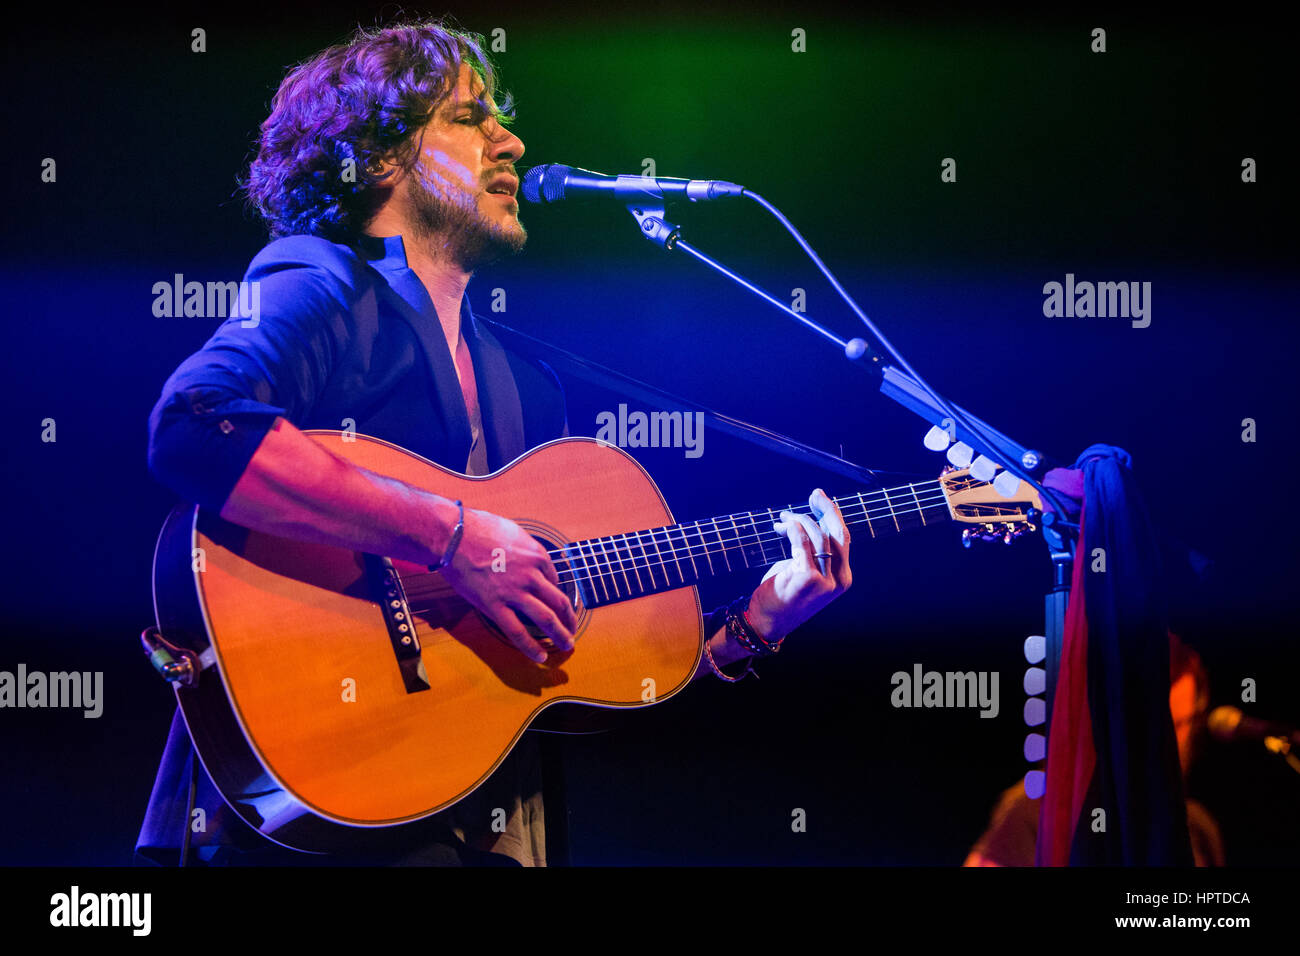 Milan, Italy. 24th Feb, 2017. The English singer-songwriter JACK SAVORETTI performs live on stage at Fabrique during the 'Sleep No More Tour' Credit: Rodolfo Sassano/Alamy Live News Stock Photo